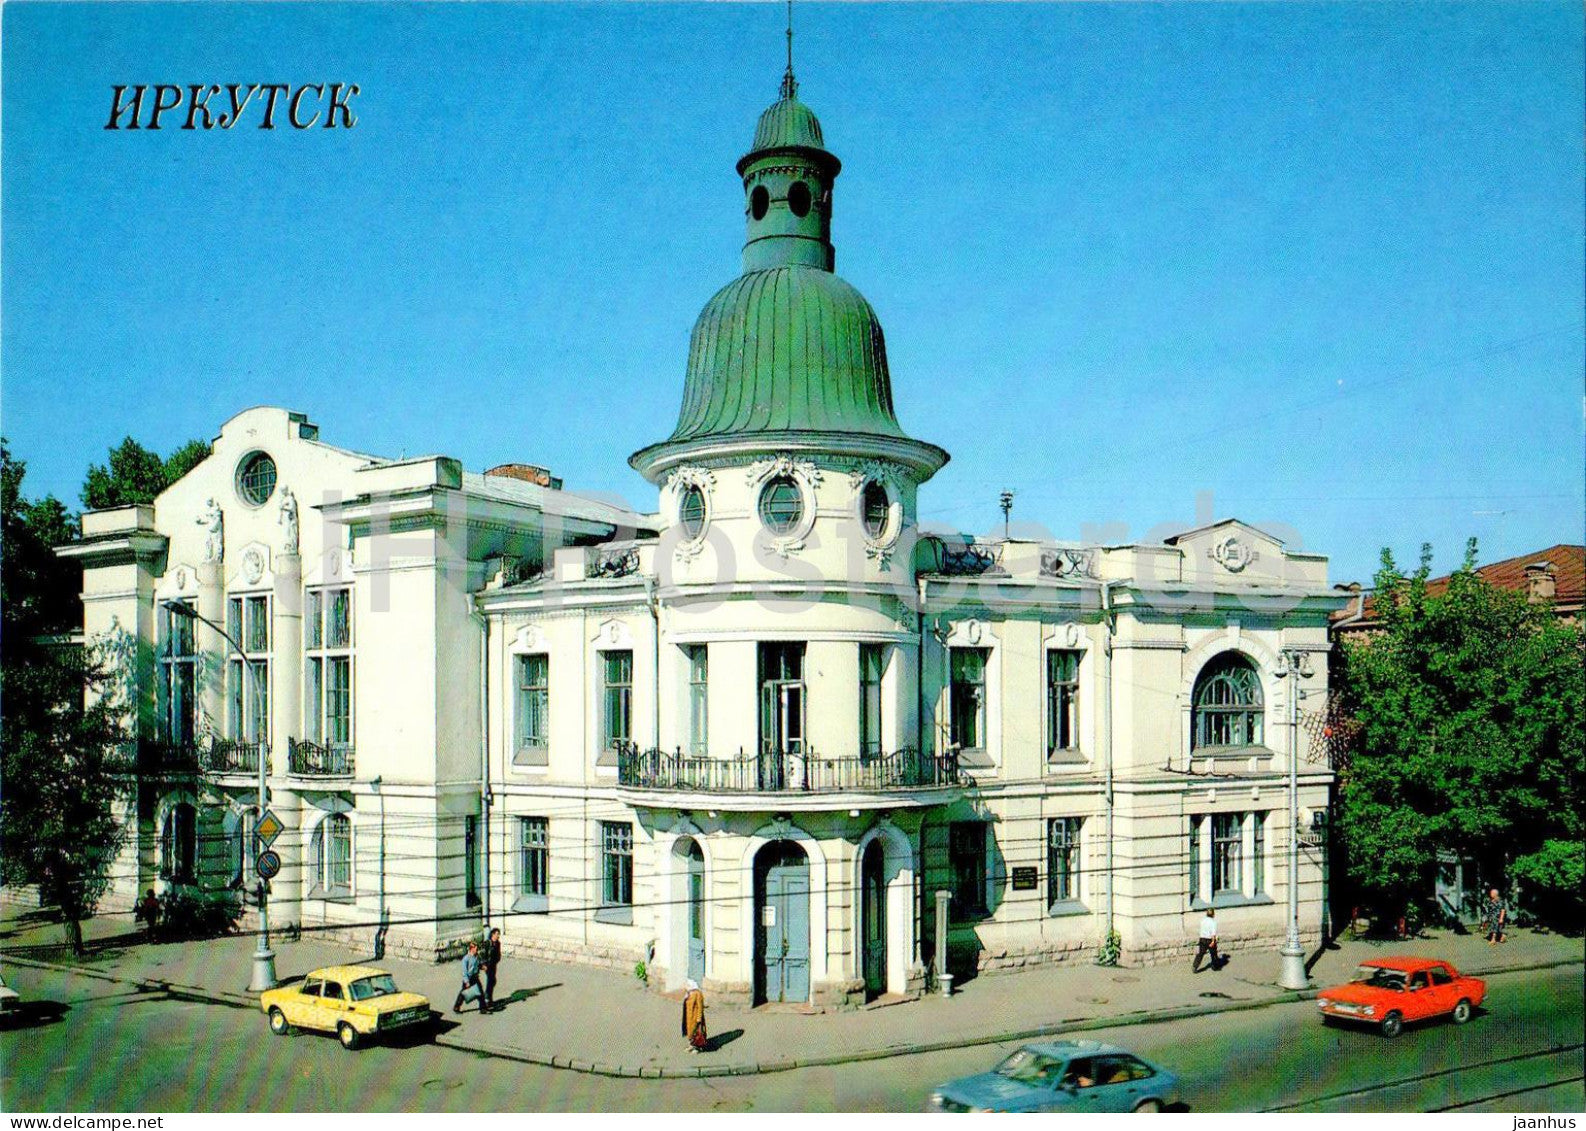 Irkutsk - City hospital - former building of Russo-Asian Bank - car Moskvich Zhiguly - 1990 - Russia USSR - unused - JH Postcards